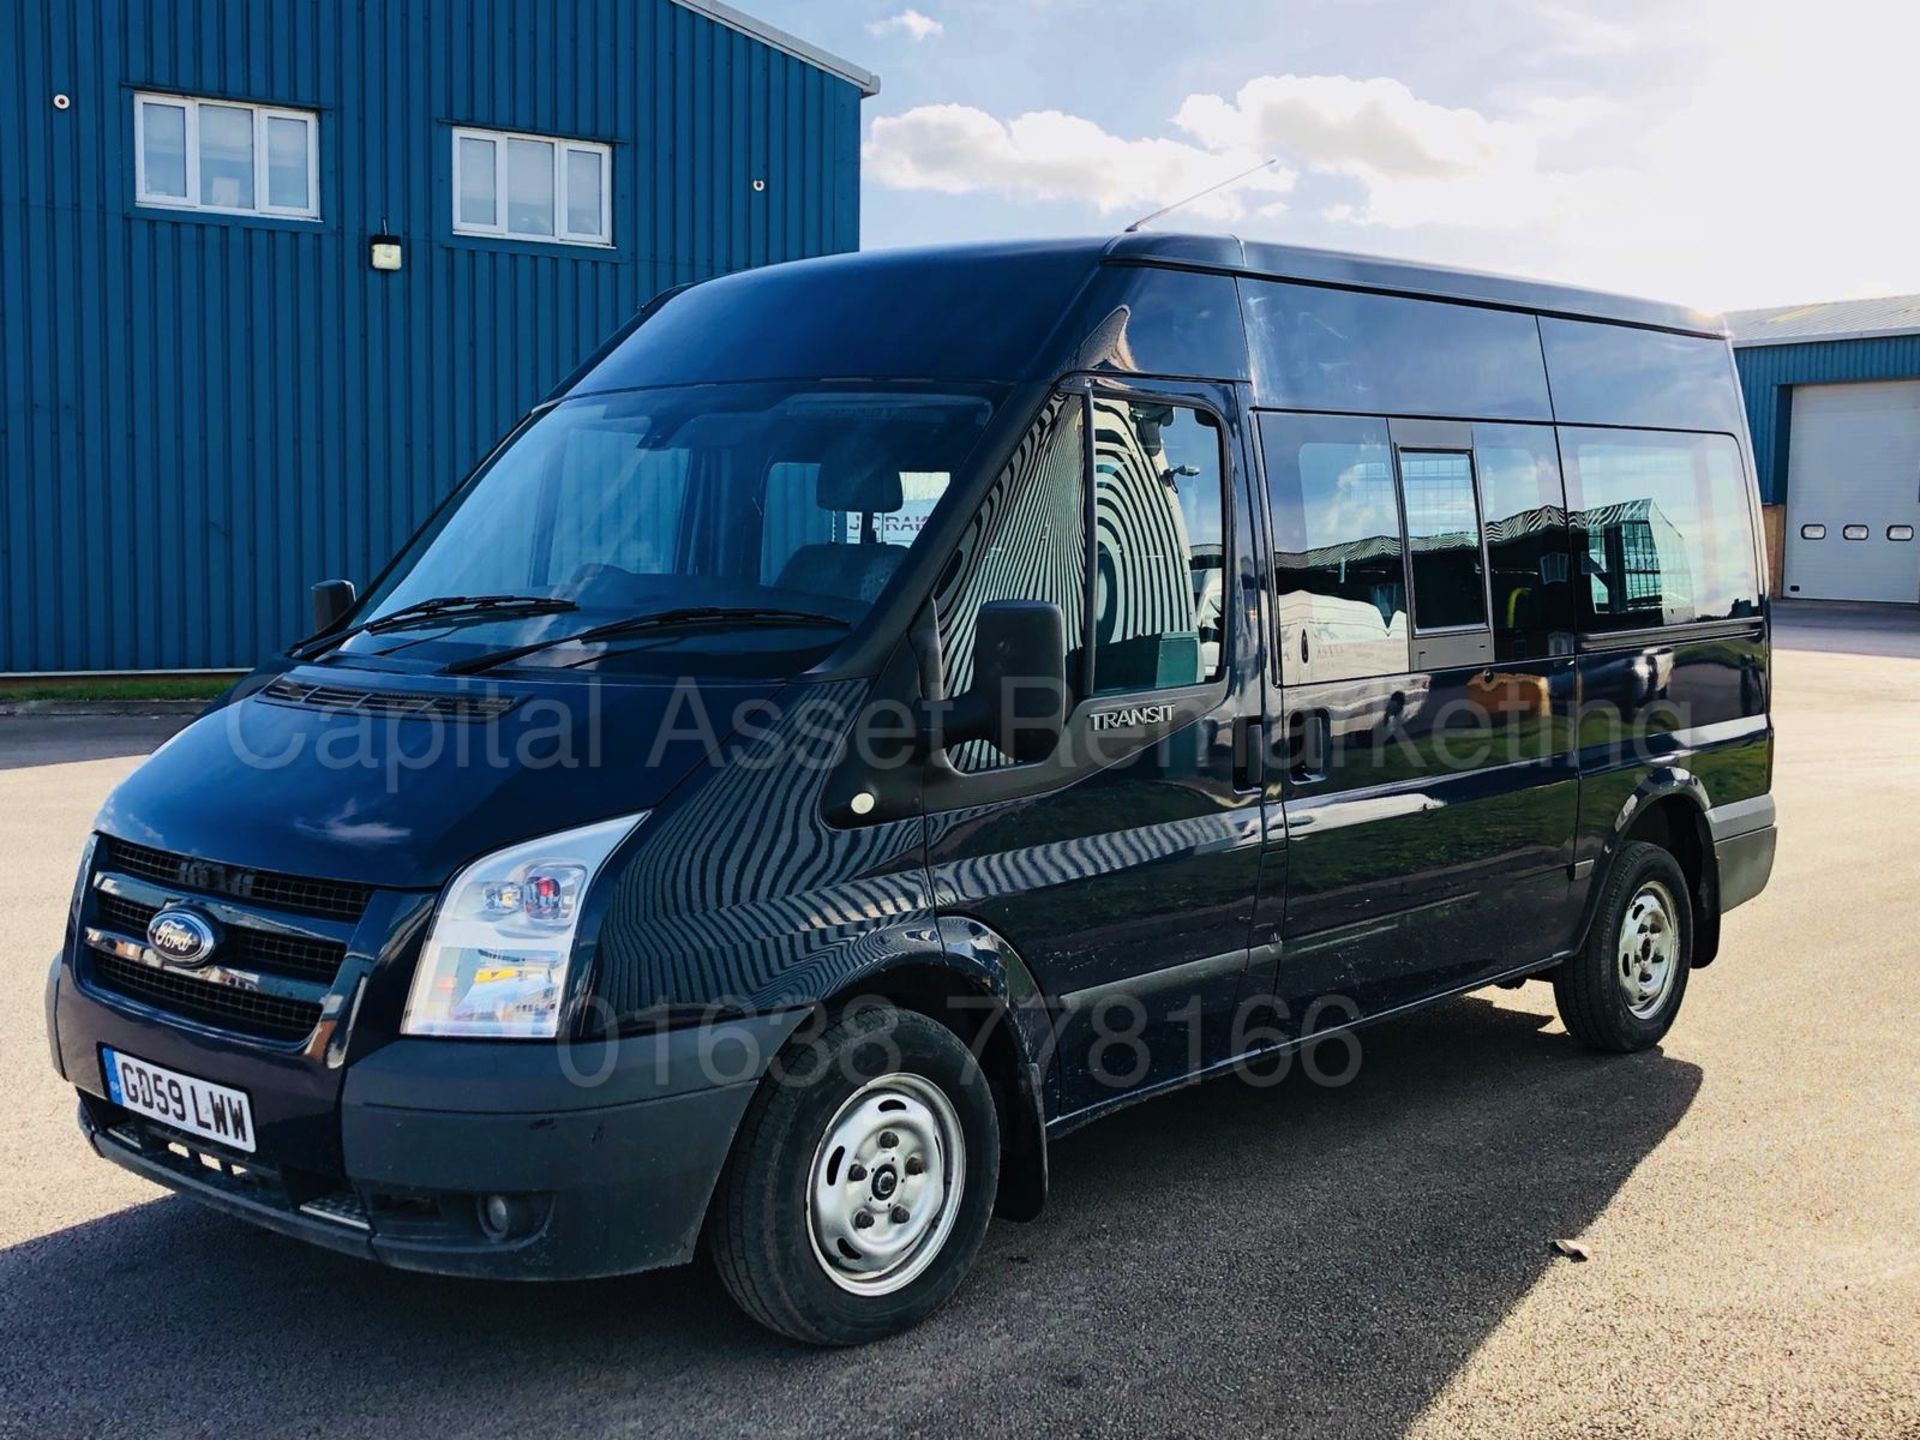 FORD TRANSIT 'TREND EDITION' 115 T300 'MW - 9 SEATER BUS' (2010) '2.2 TDCI - 115 PS - 6 SPEED'